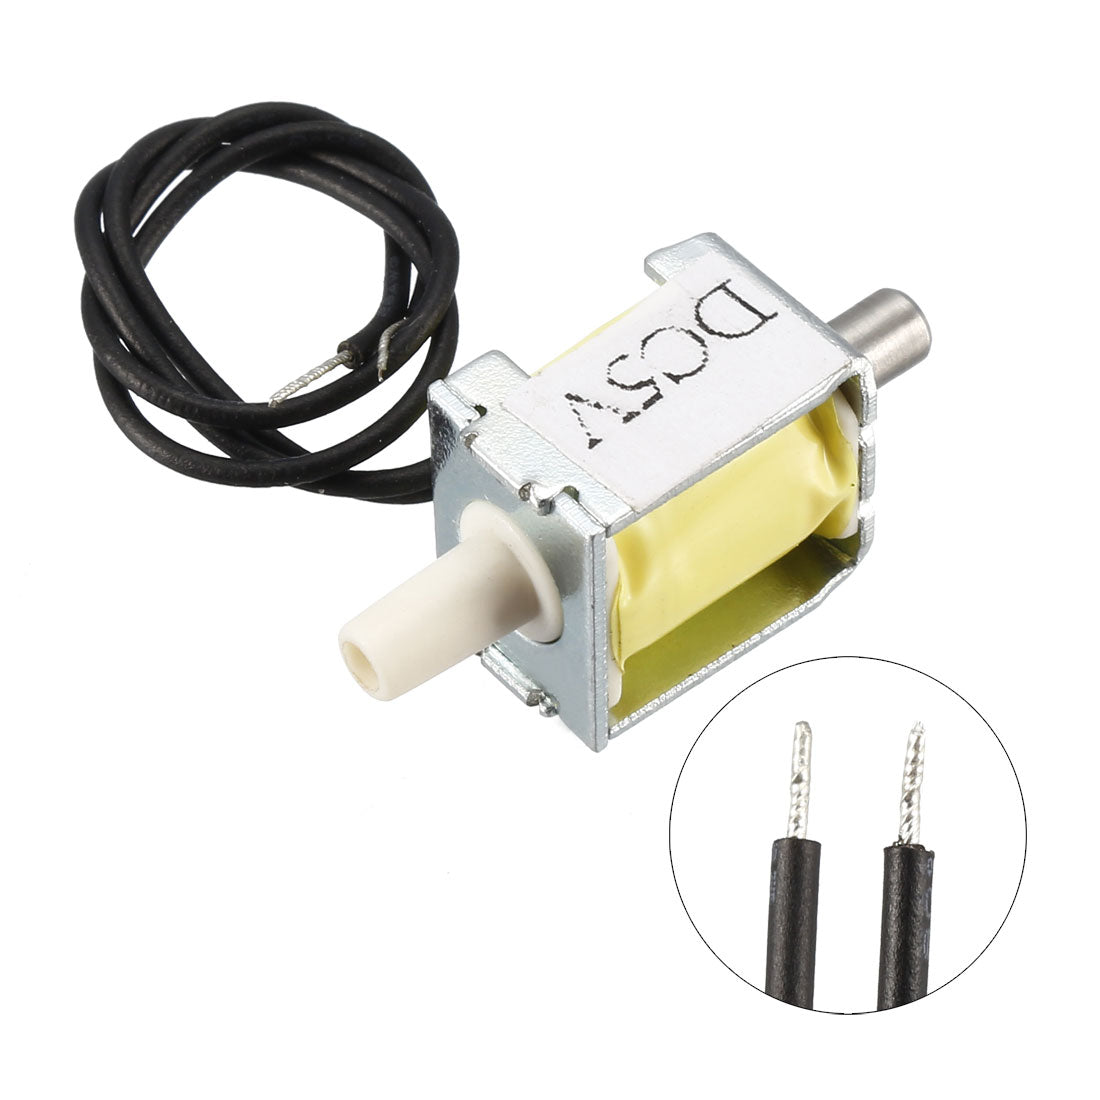 uxcell Uxcell Miniature Solenoid Valve 2 Way Normally Closed DC5V 0.26A Air Solenoid Valve